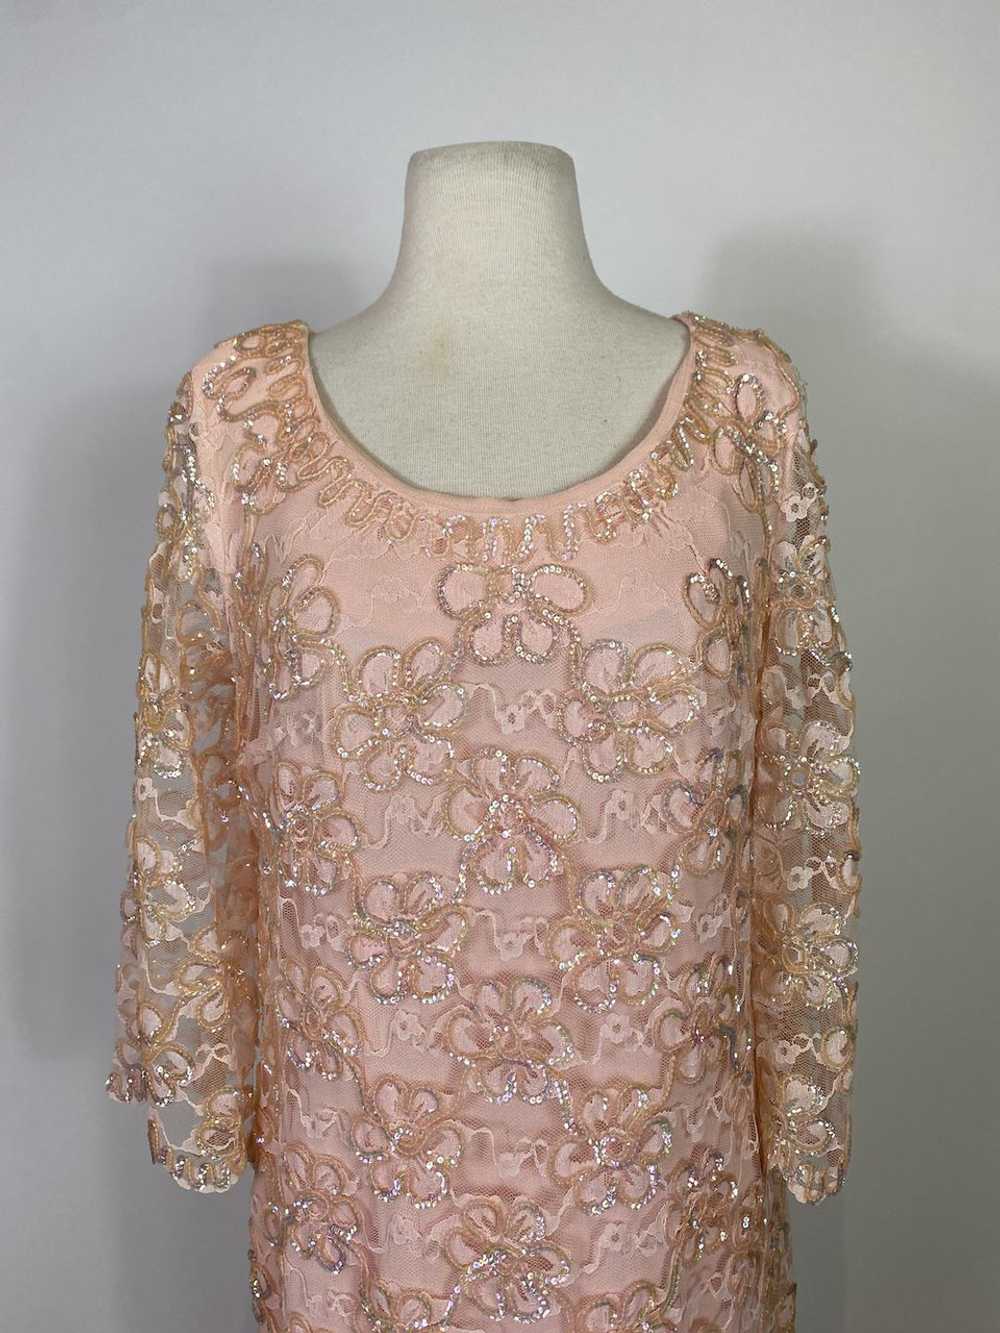 1960s Jr. Theme Pink Sequin and Lace Shift Dress - image 2